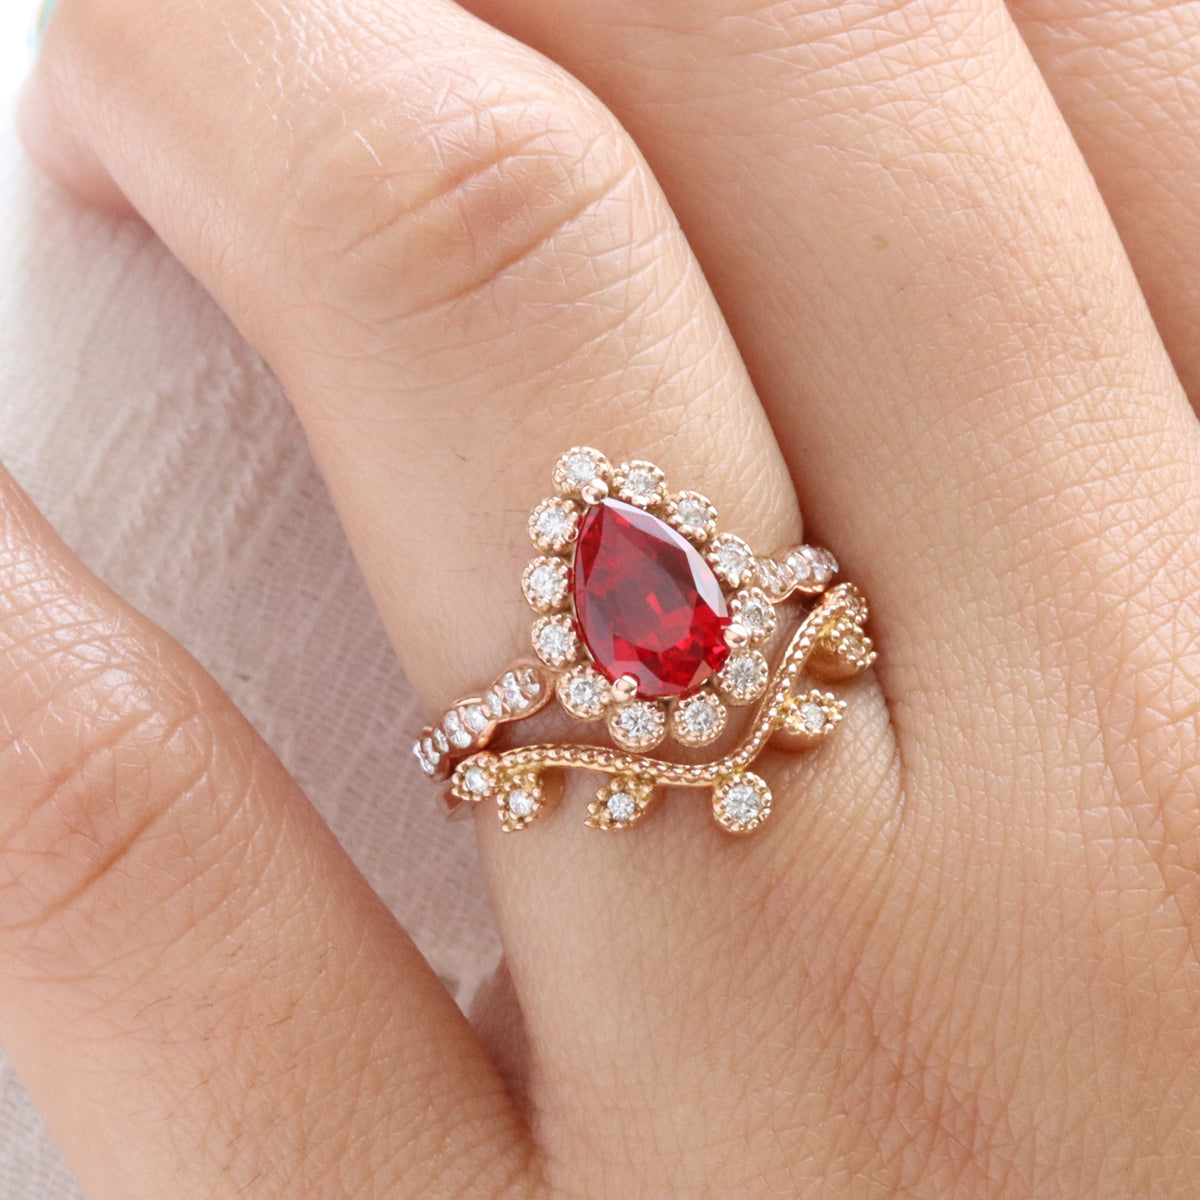 Vintage style pear ruby ring bridal set rose gold curved leaf diamond wedding ring stack la more design jewelry